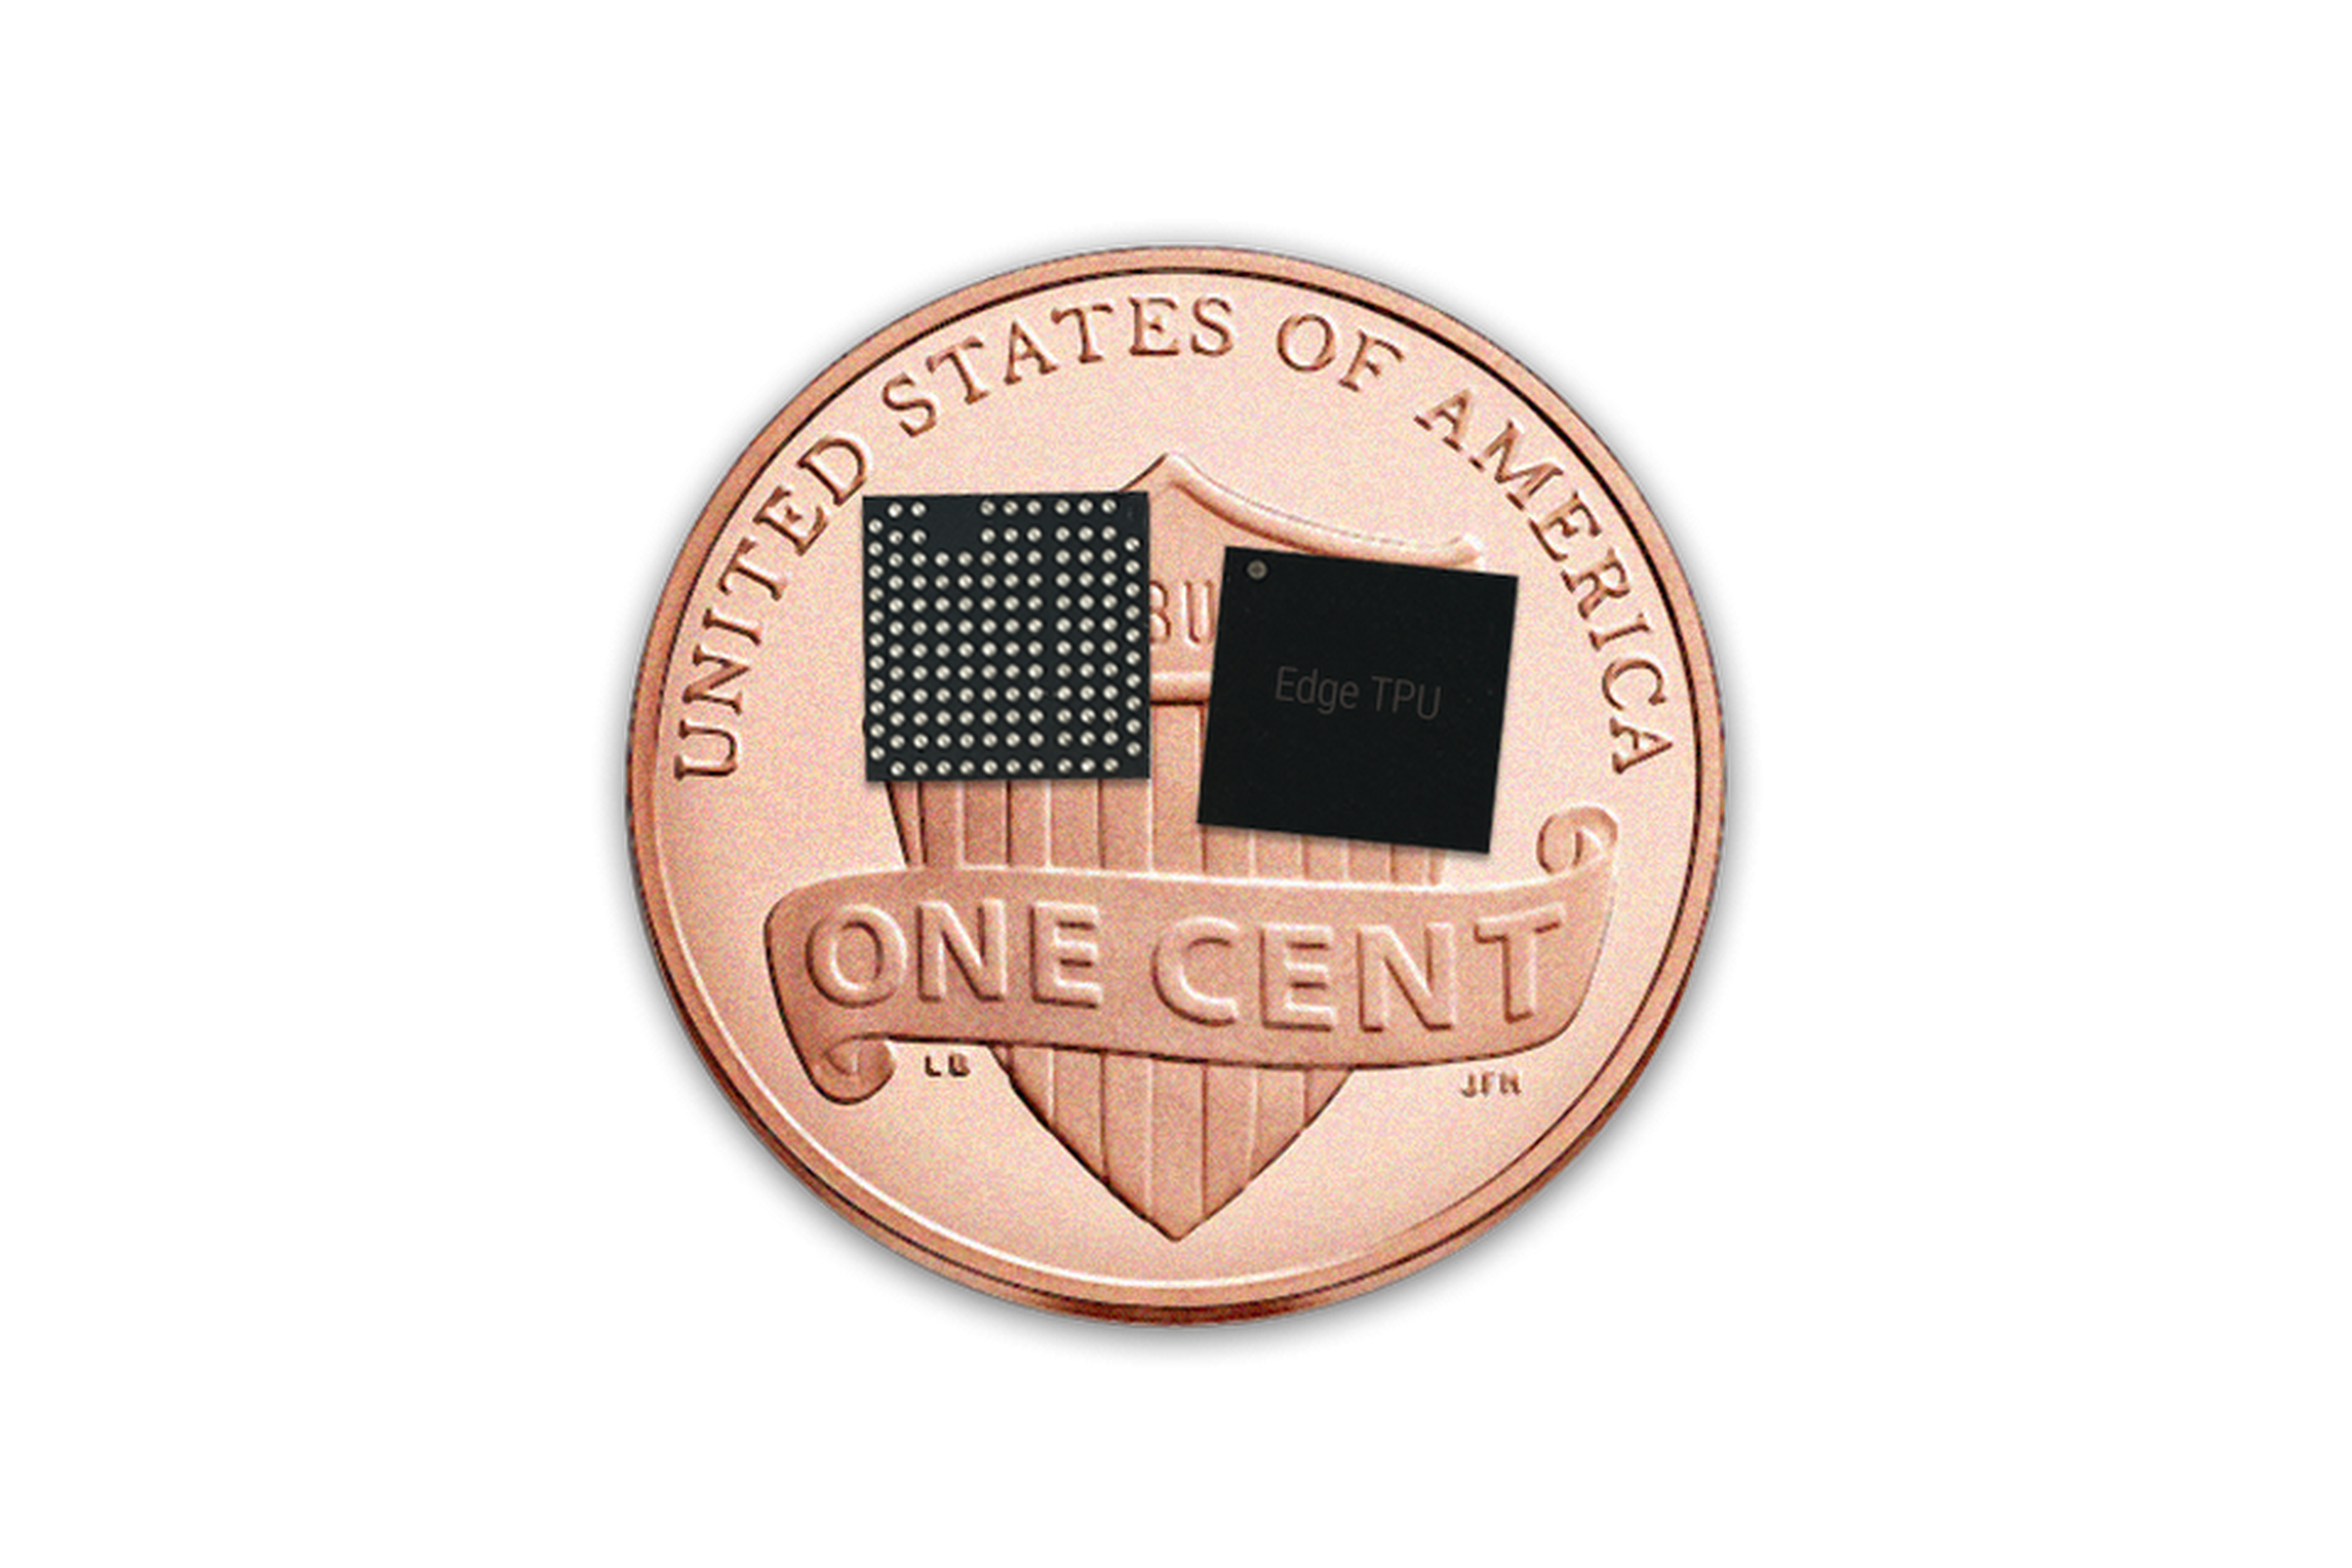 Google’s new Edge TPU chips on a standard US penny. 